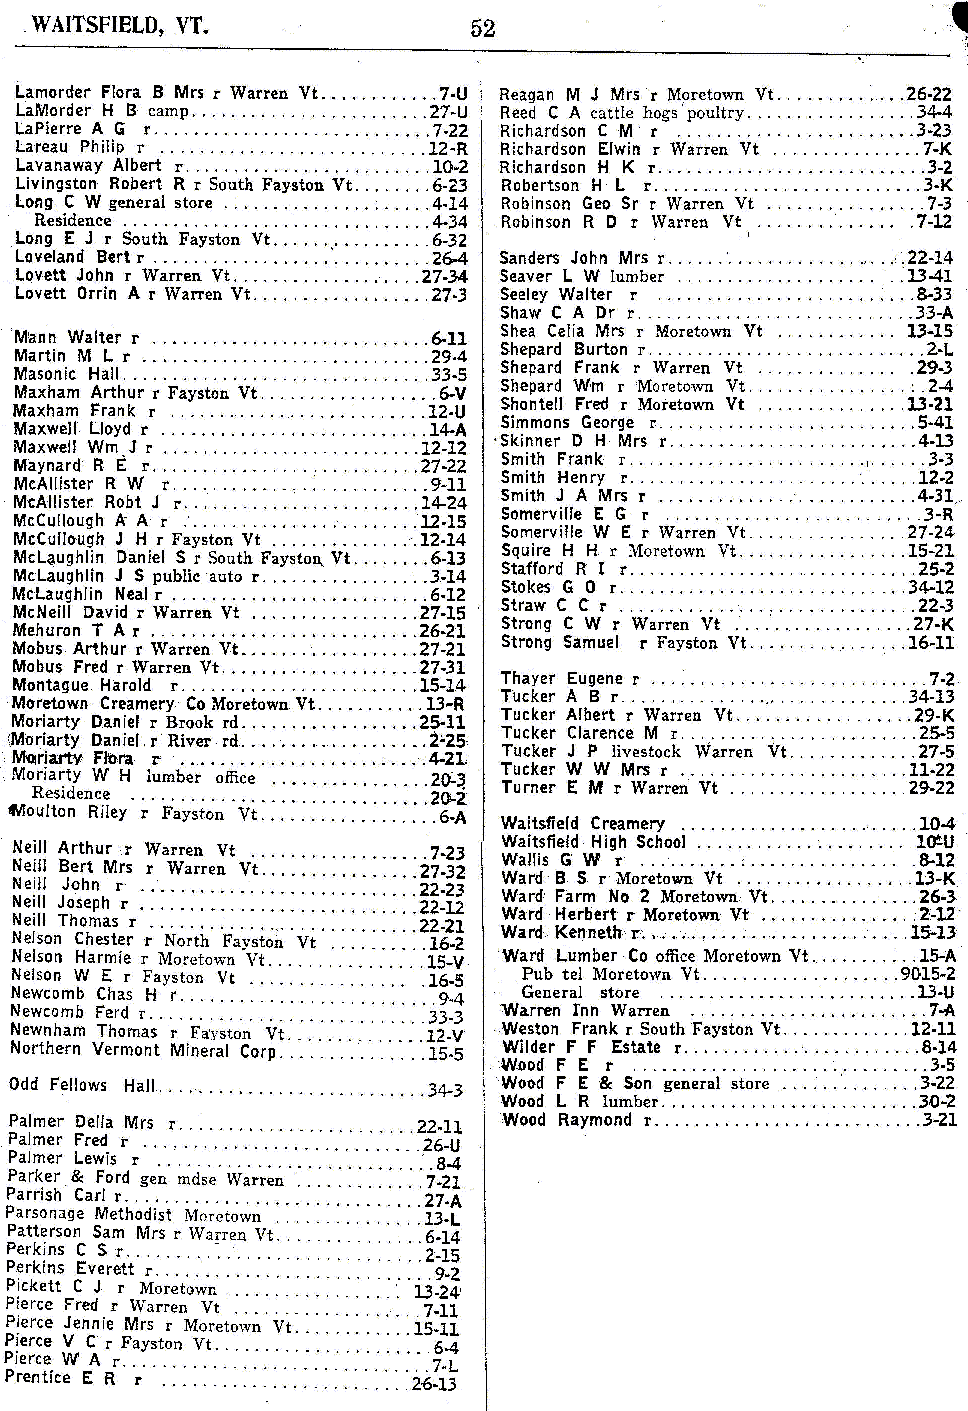 1928 Waitsfield Vt Telephone Book - Page 52